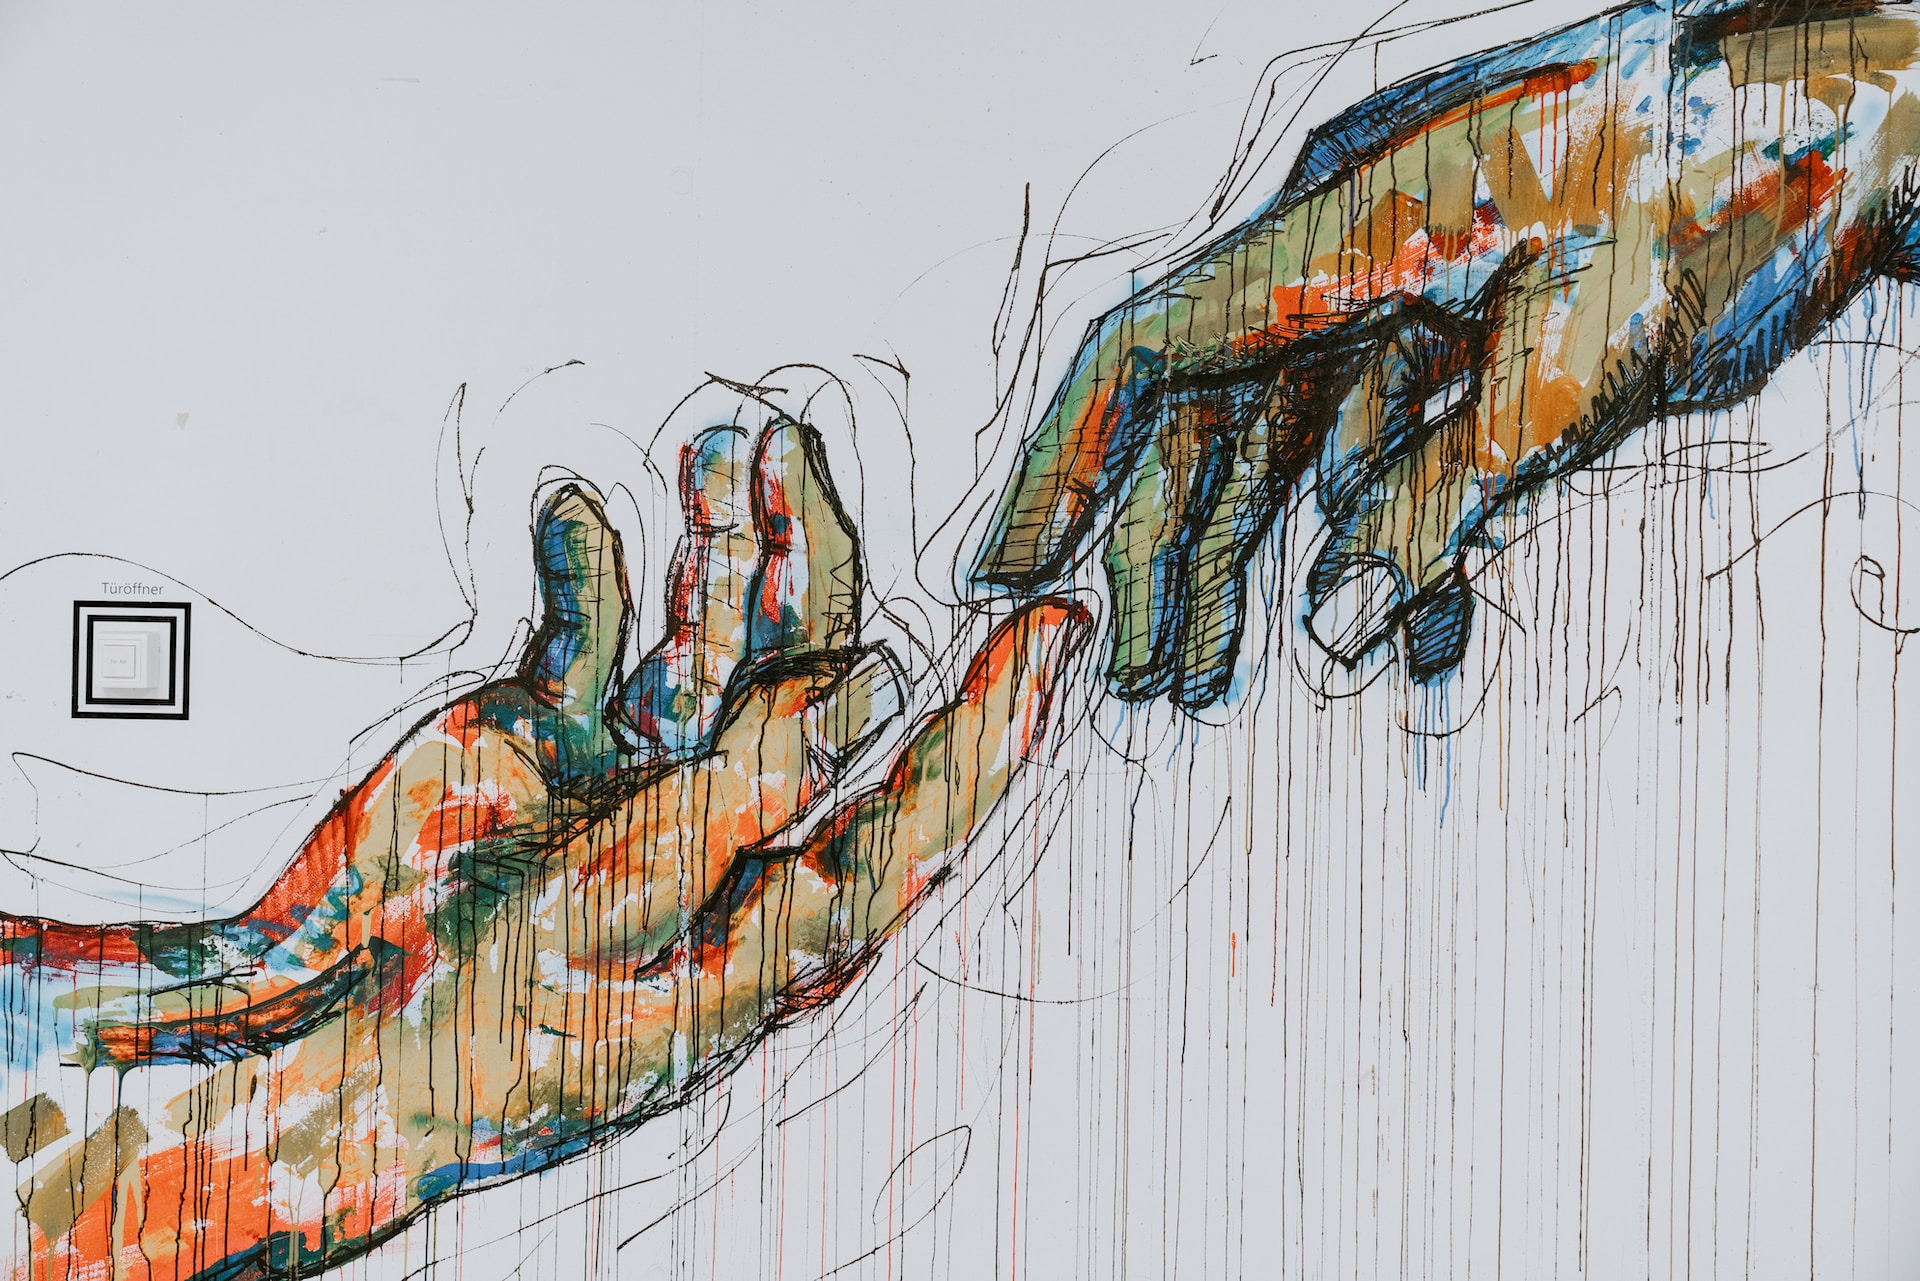 Artwork of Two Hands Reaching Out